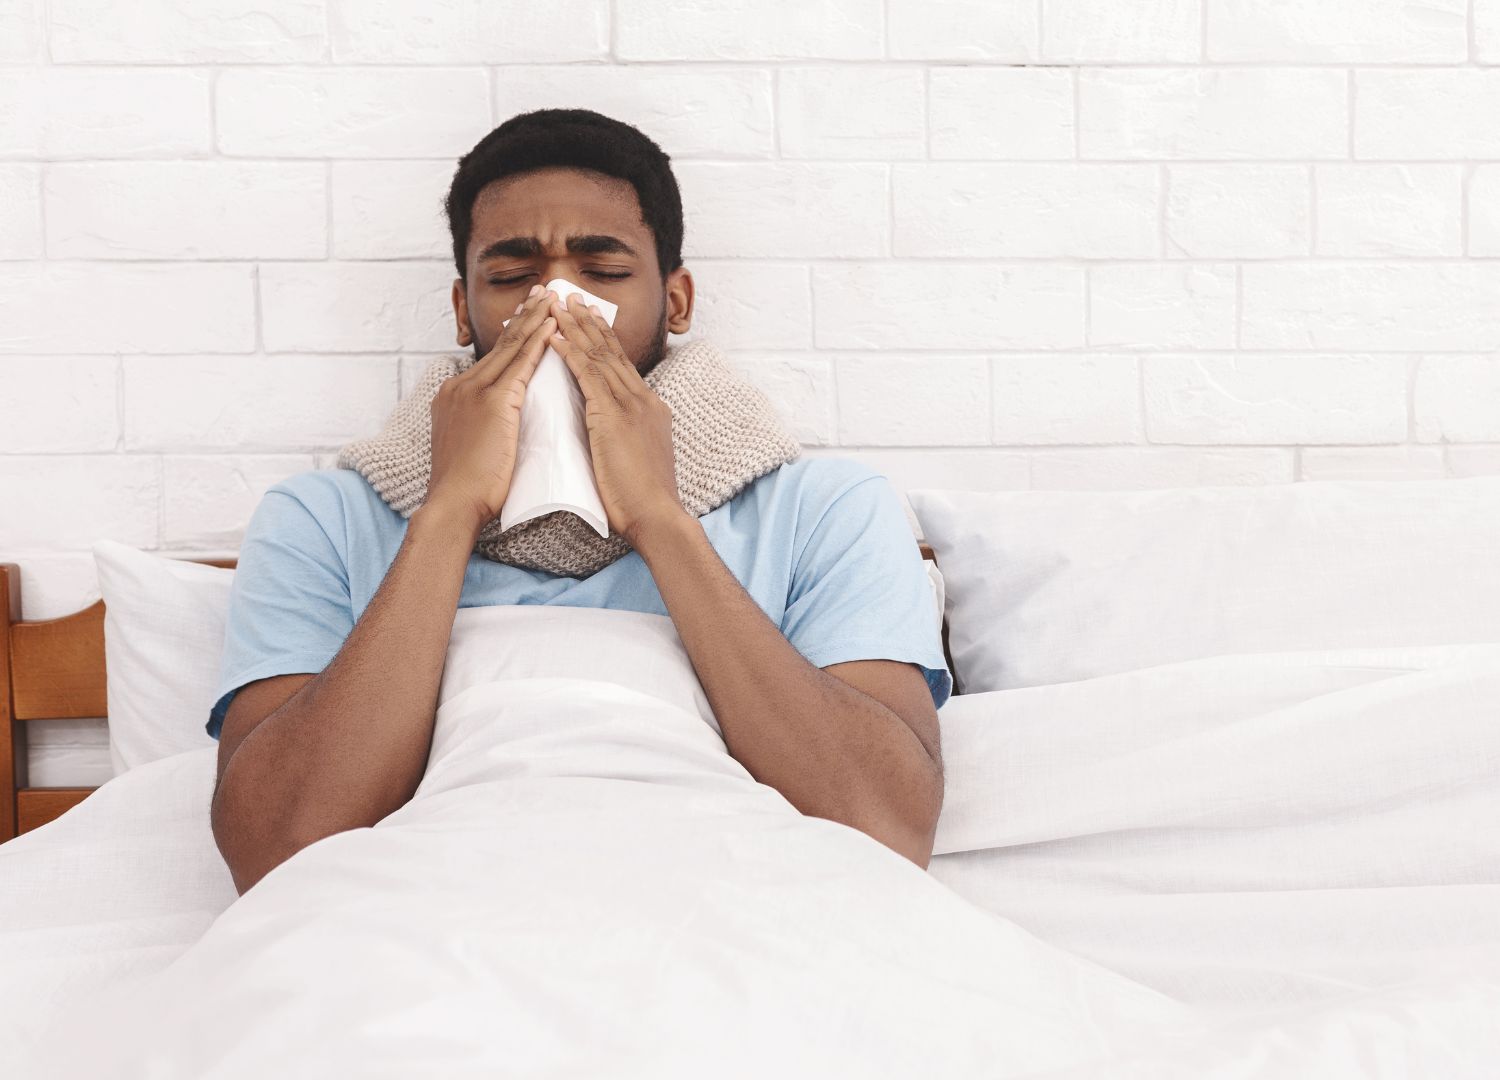 "Allergic rhinitis: A runny nose that  won't leave me alone"